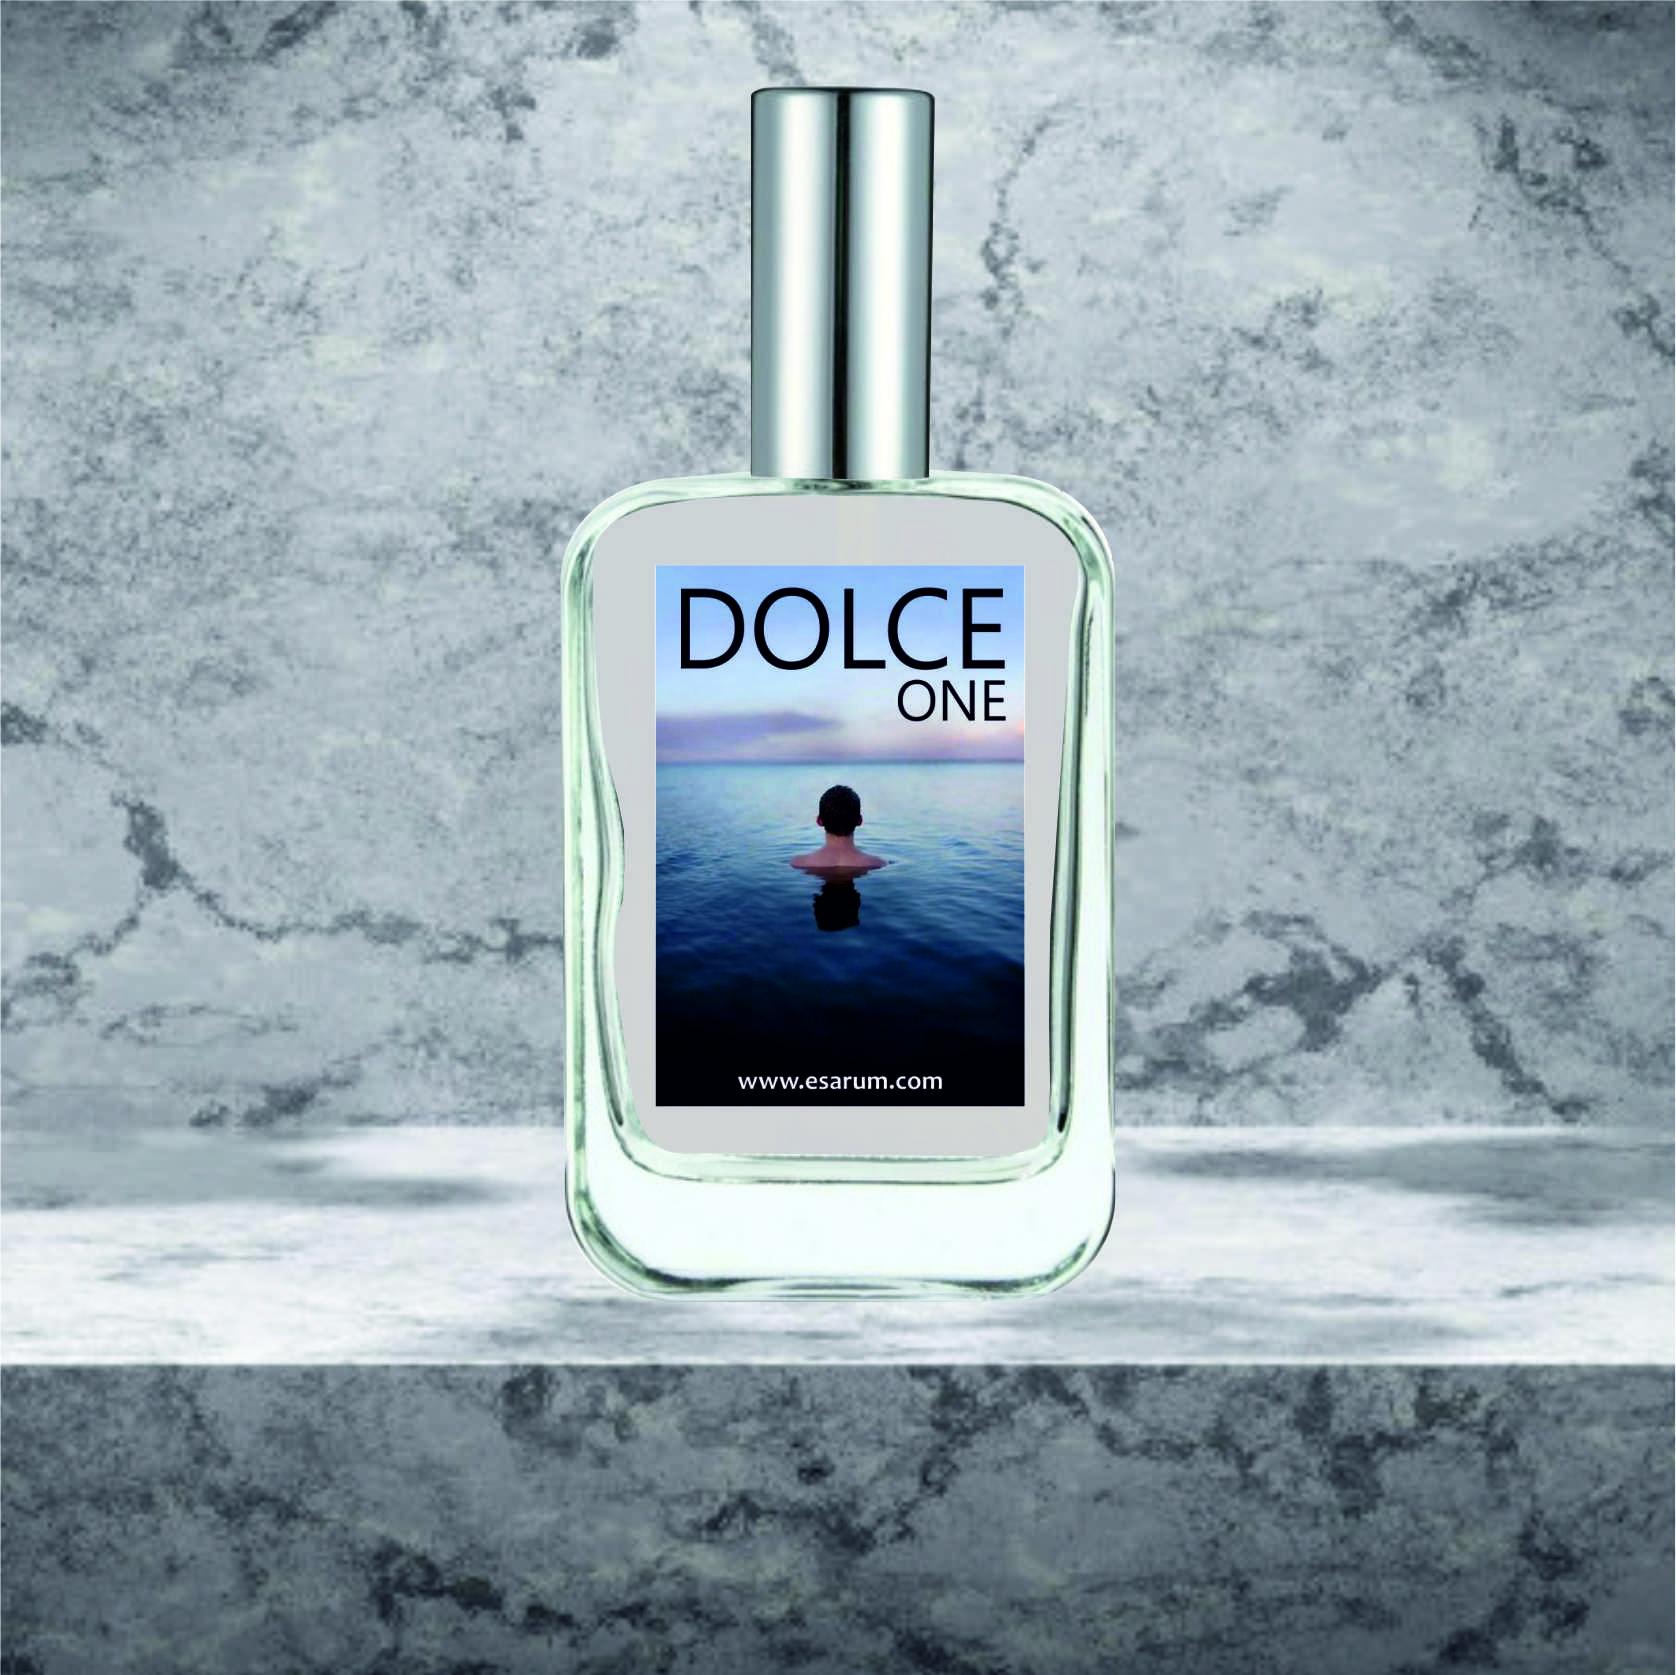 ESARUM.COM - DOLCE ONE. PERFUME PERMANENTE. Si te gusta Dolce & Gabanna (The one)